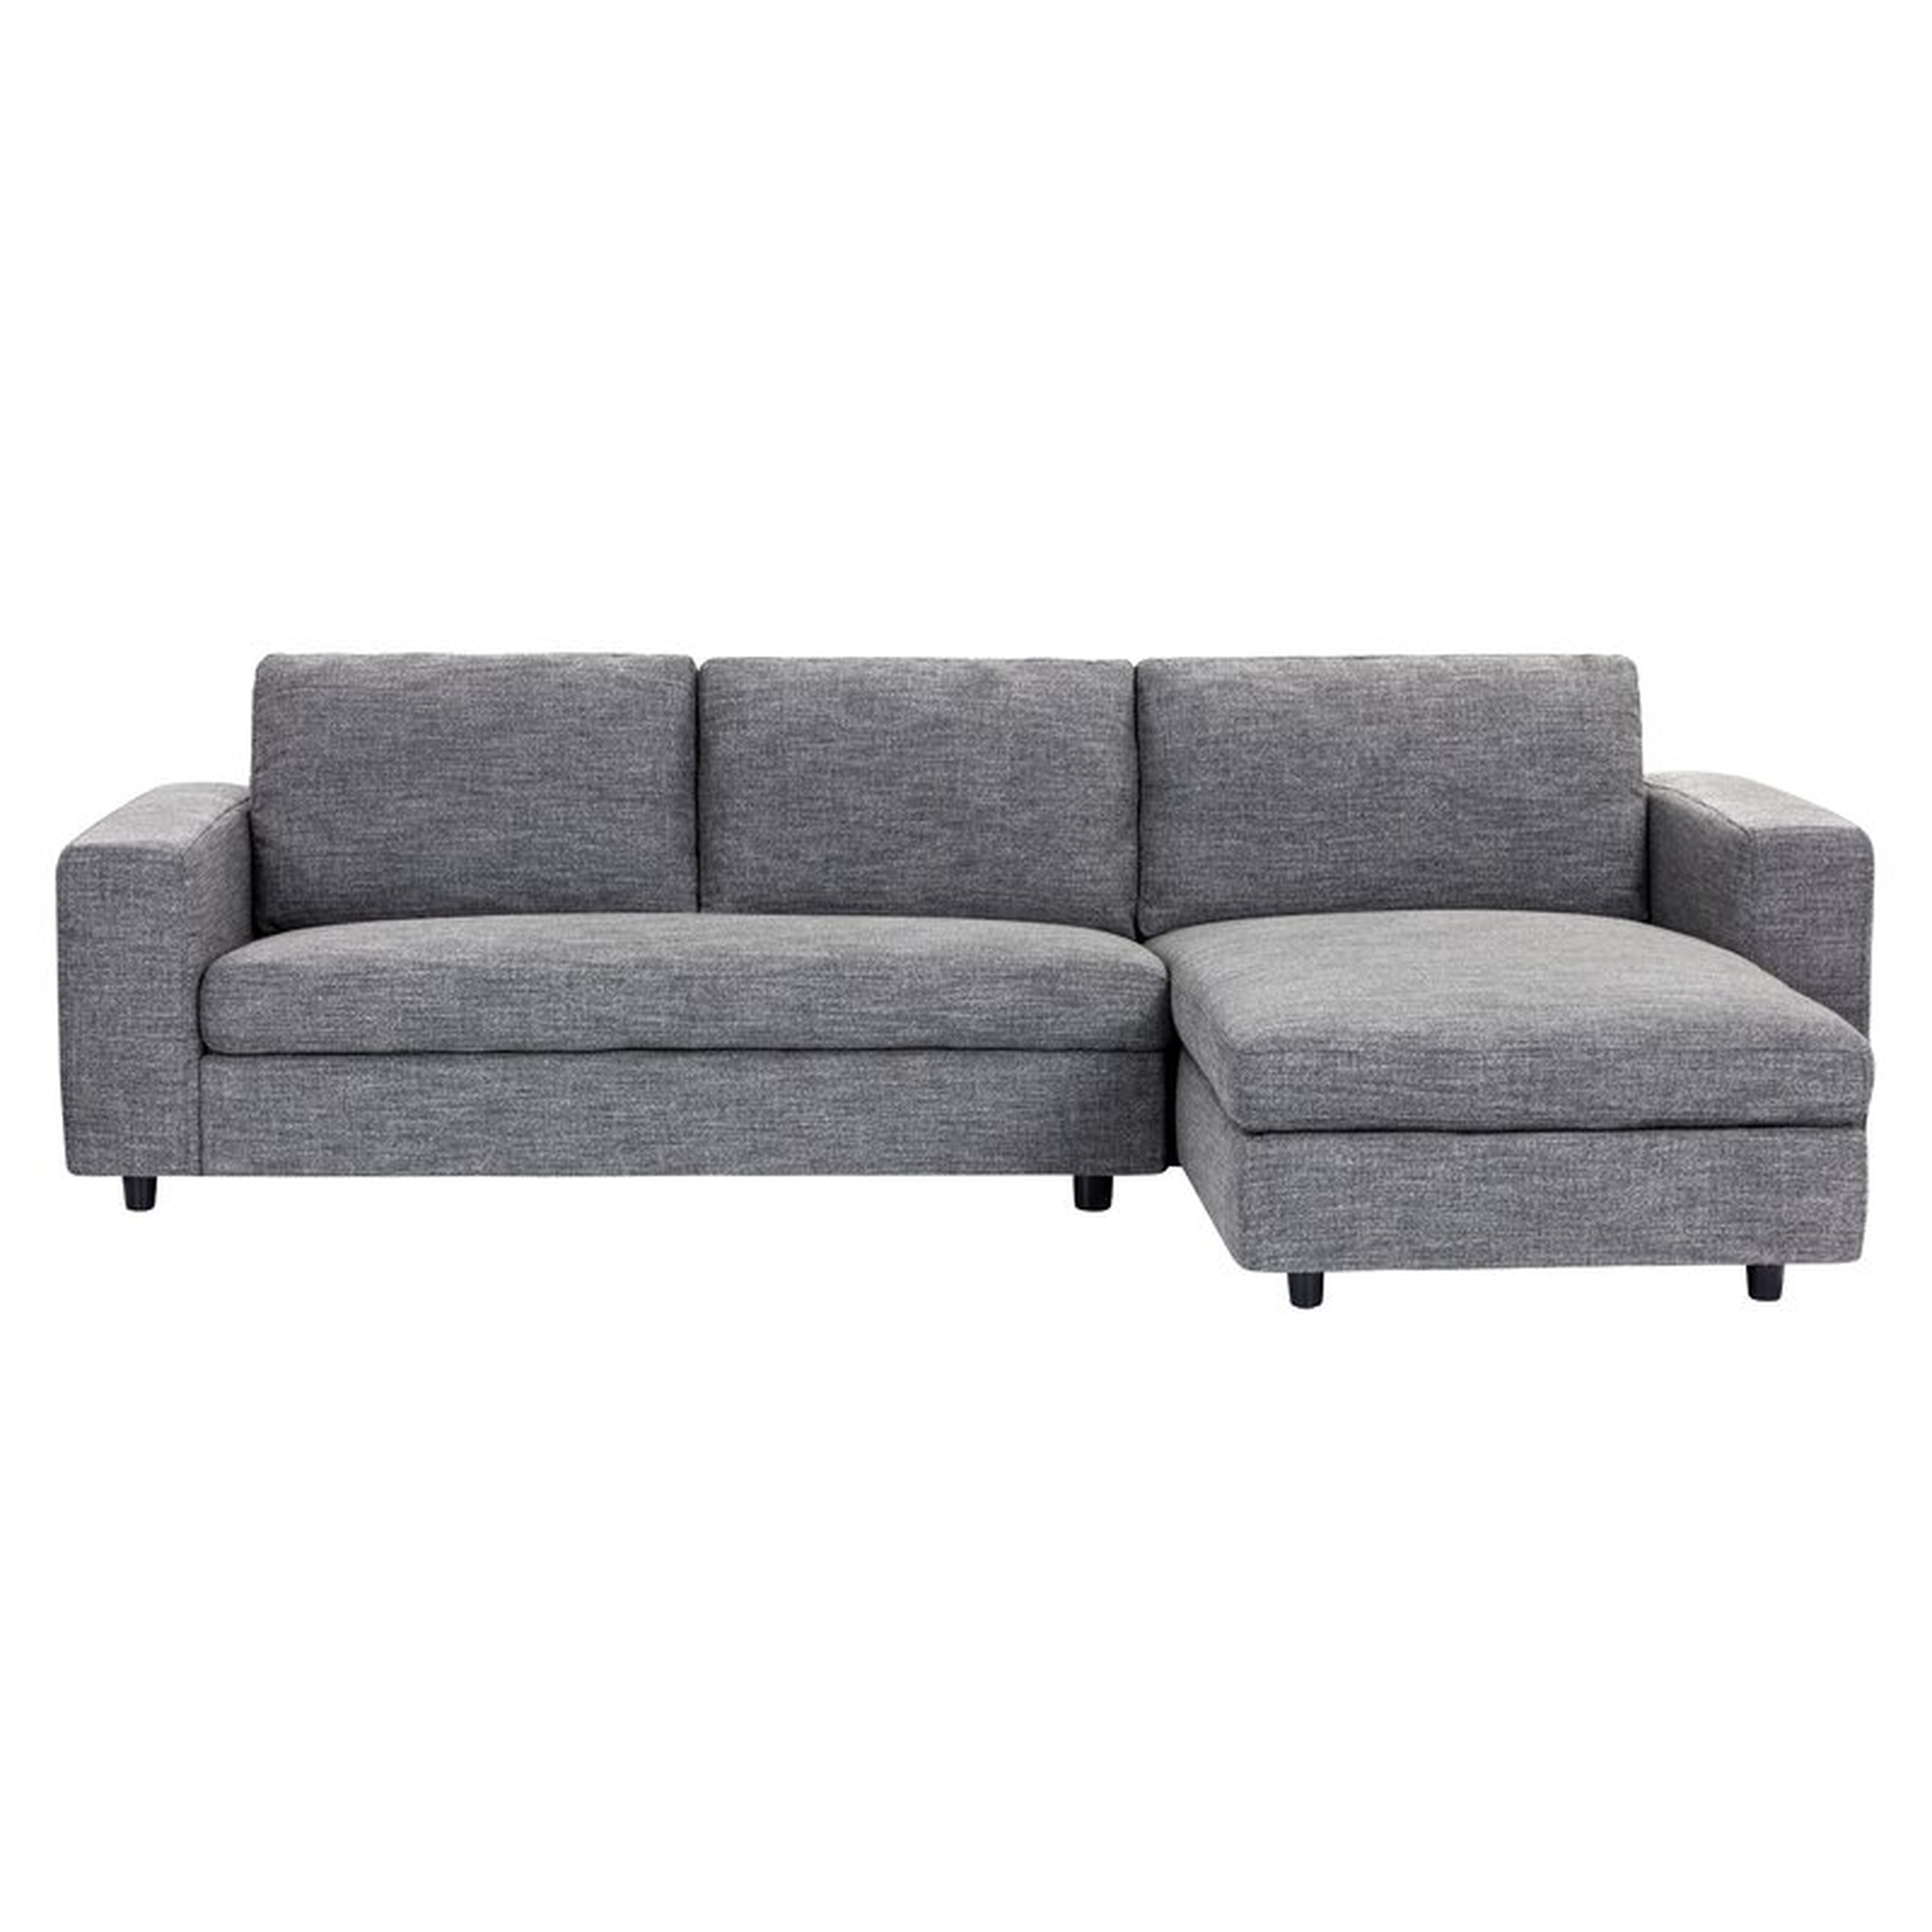 Ethan Right Hand Facing Sectional - AllModern